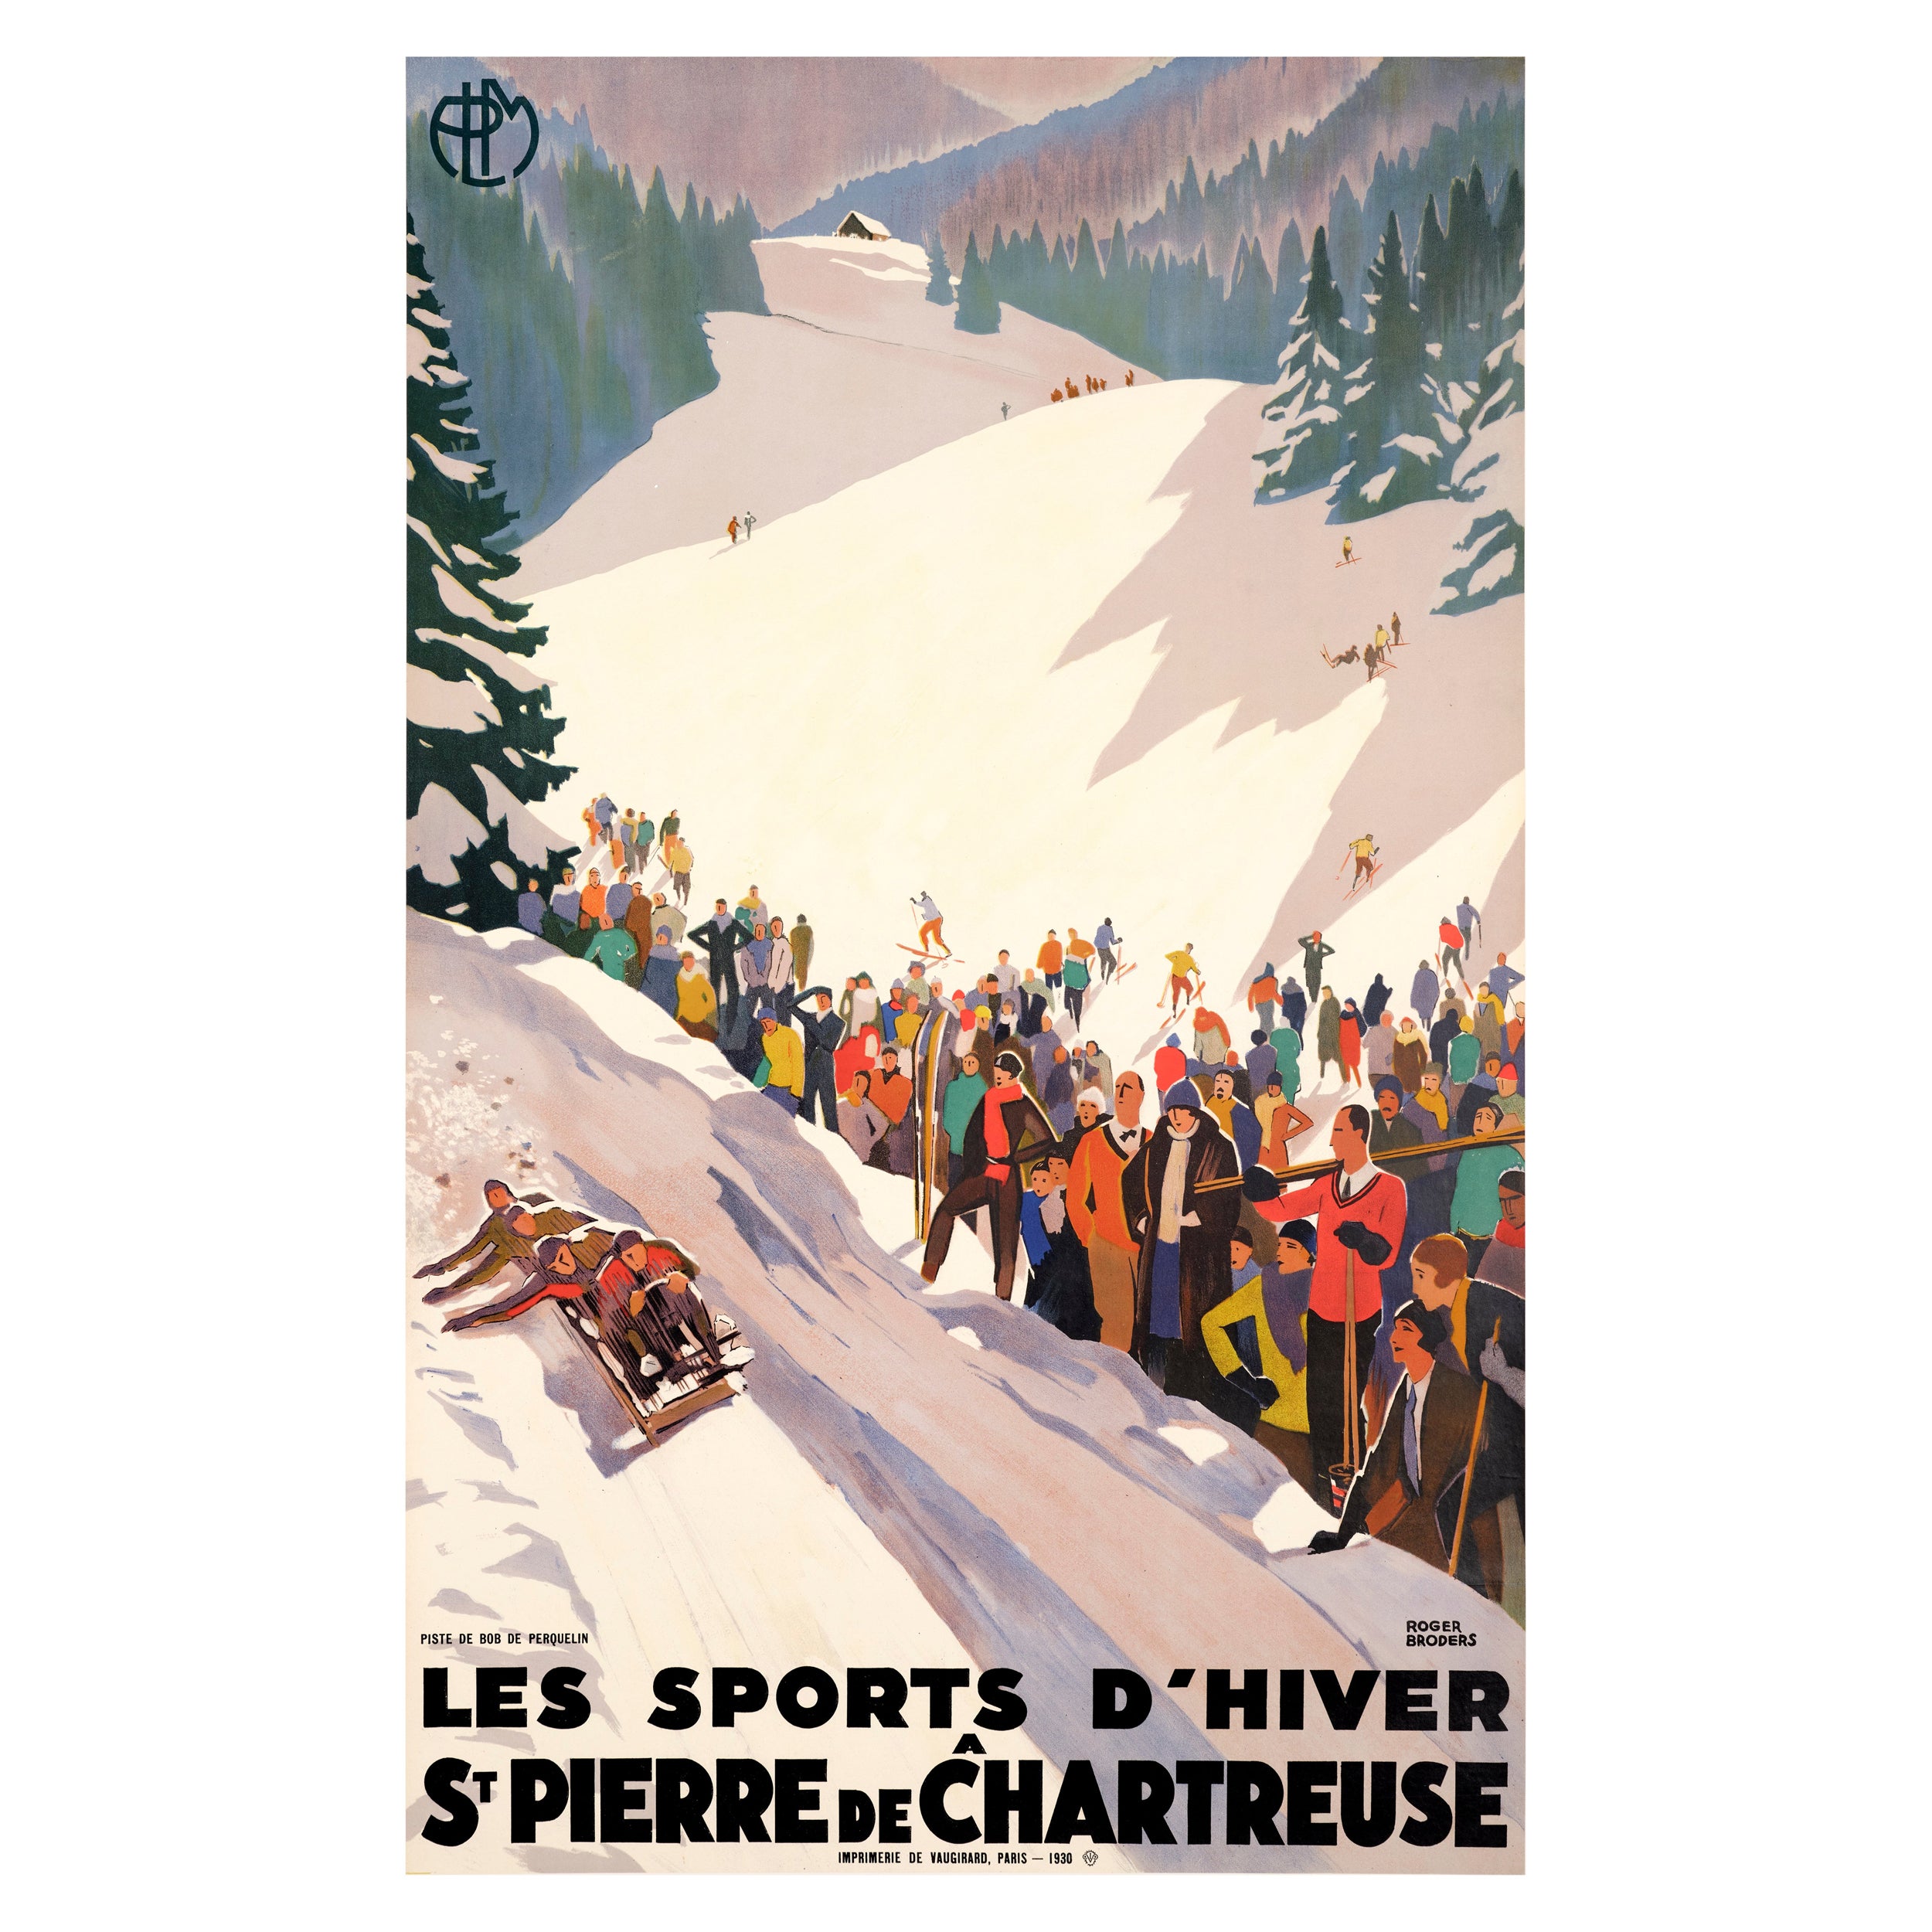 Broders, Original Art Deco Poster, Winter Sports, Bobsleigh Skiing Art Deco 1930 For Sale